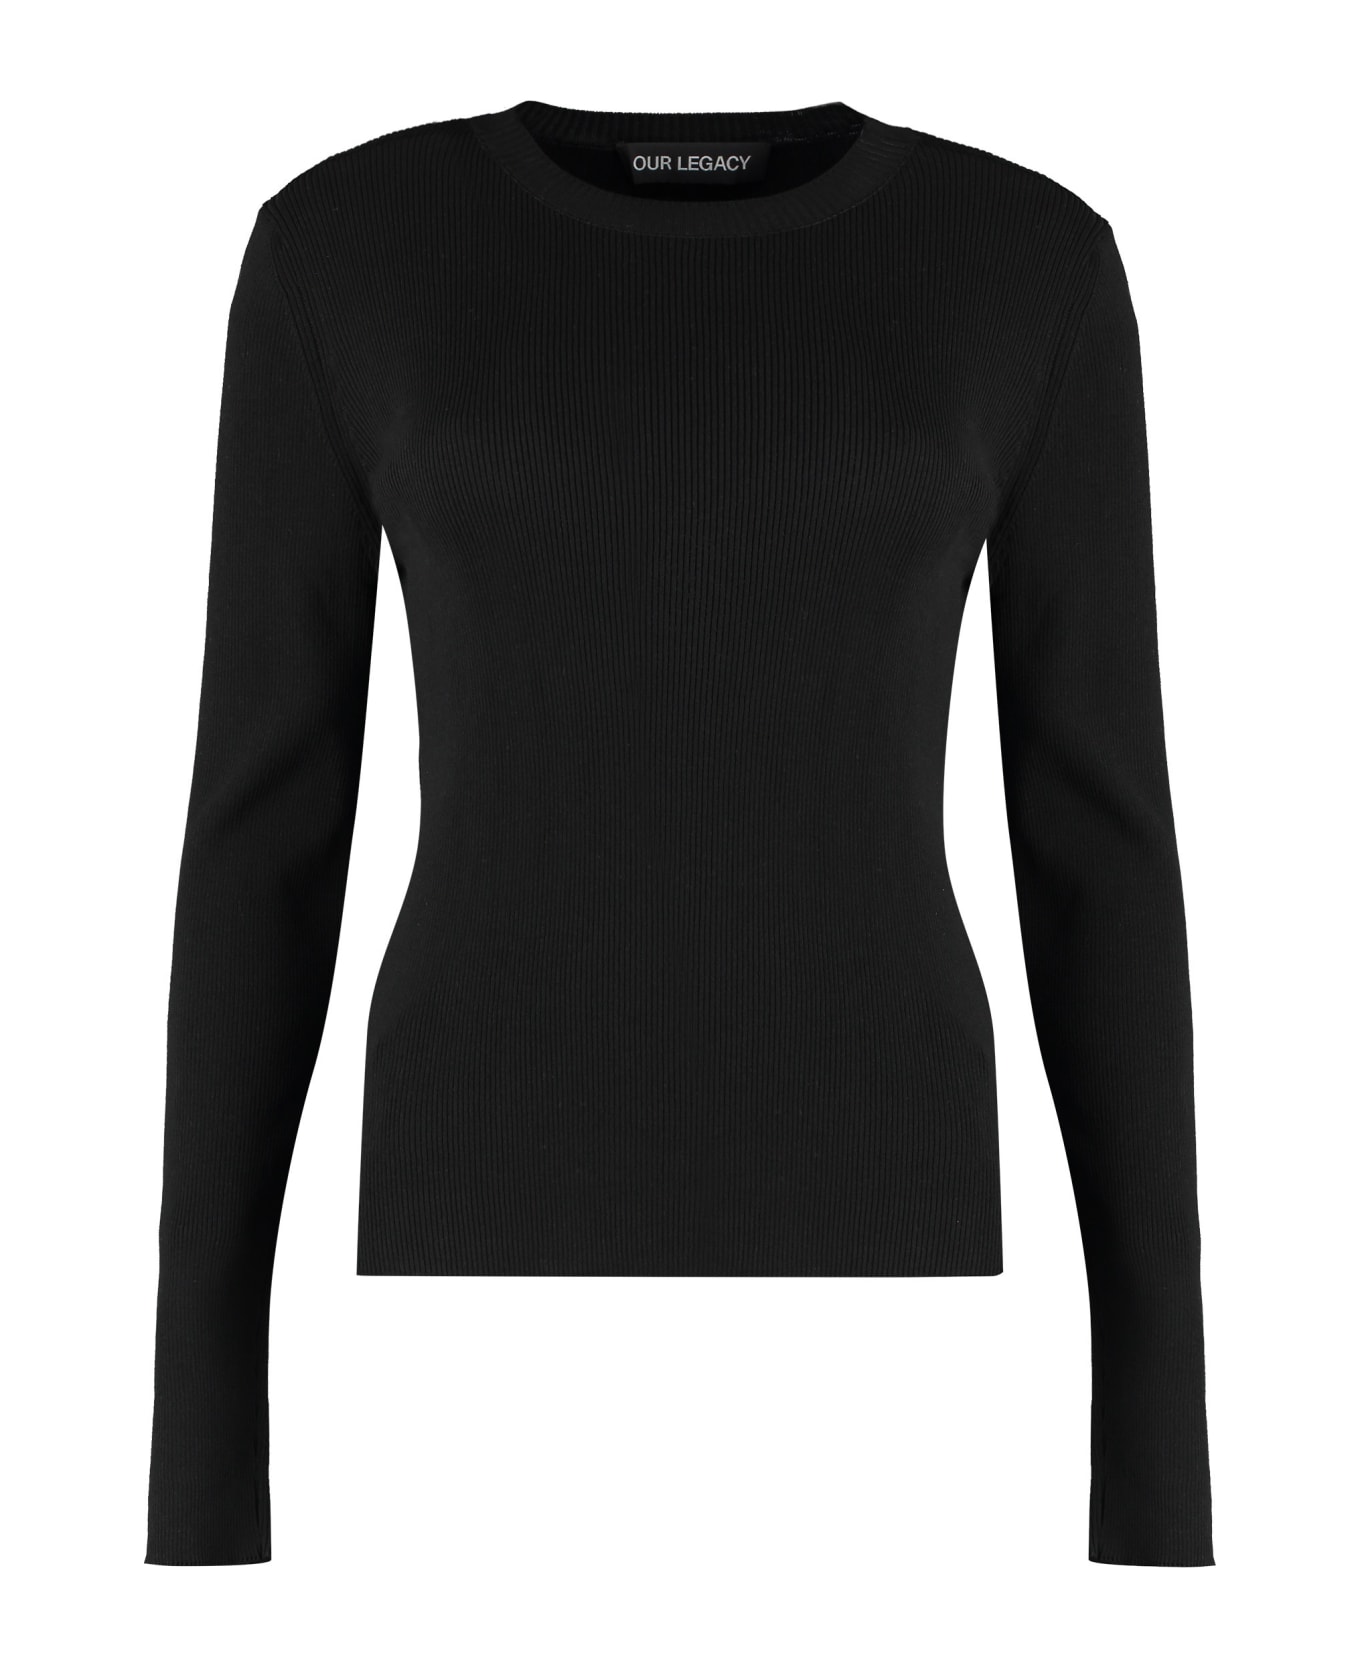 Our Legacy Compact Long Sleeve T-shirt - black ニットウェア